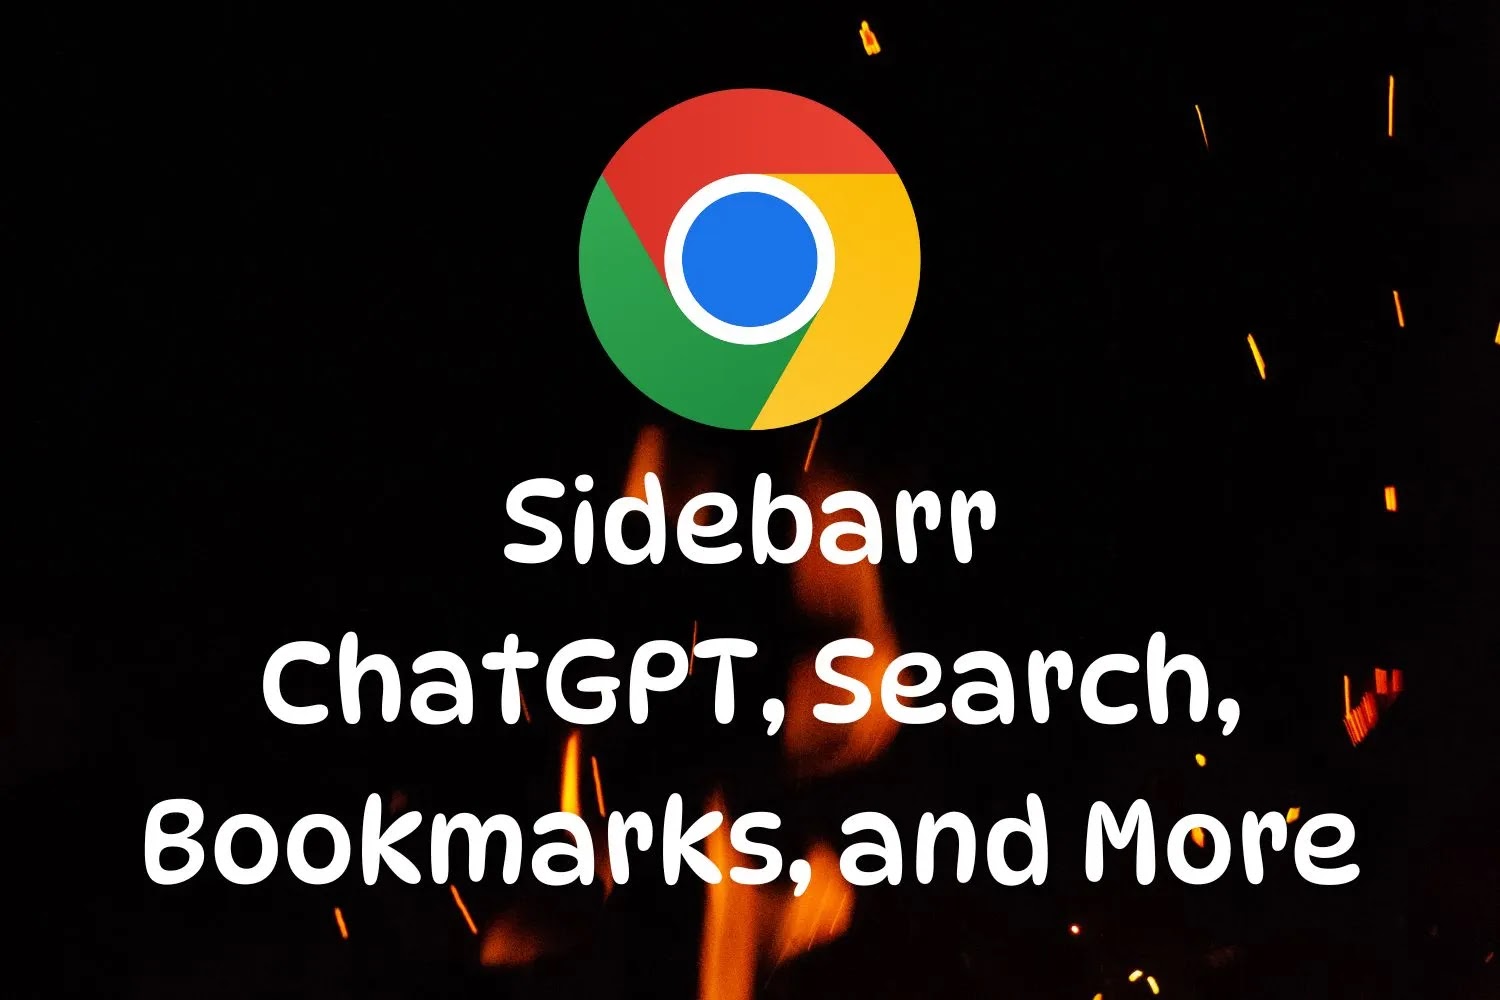 Sidebarr - ChatGPT, Bookmarks, Apps and More